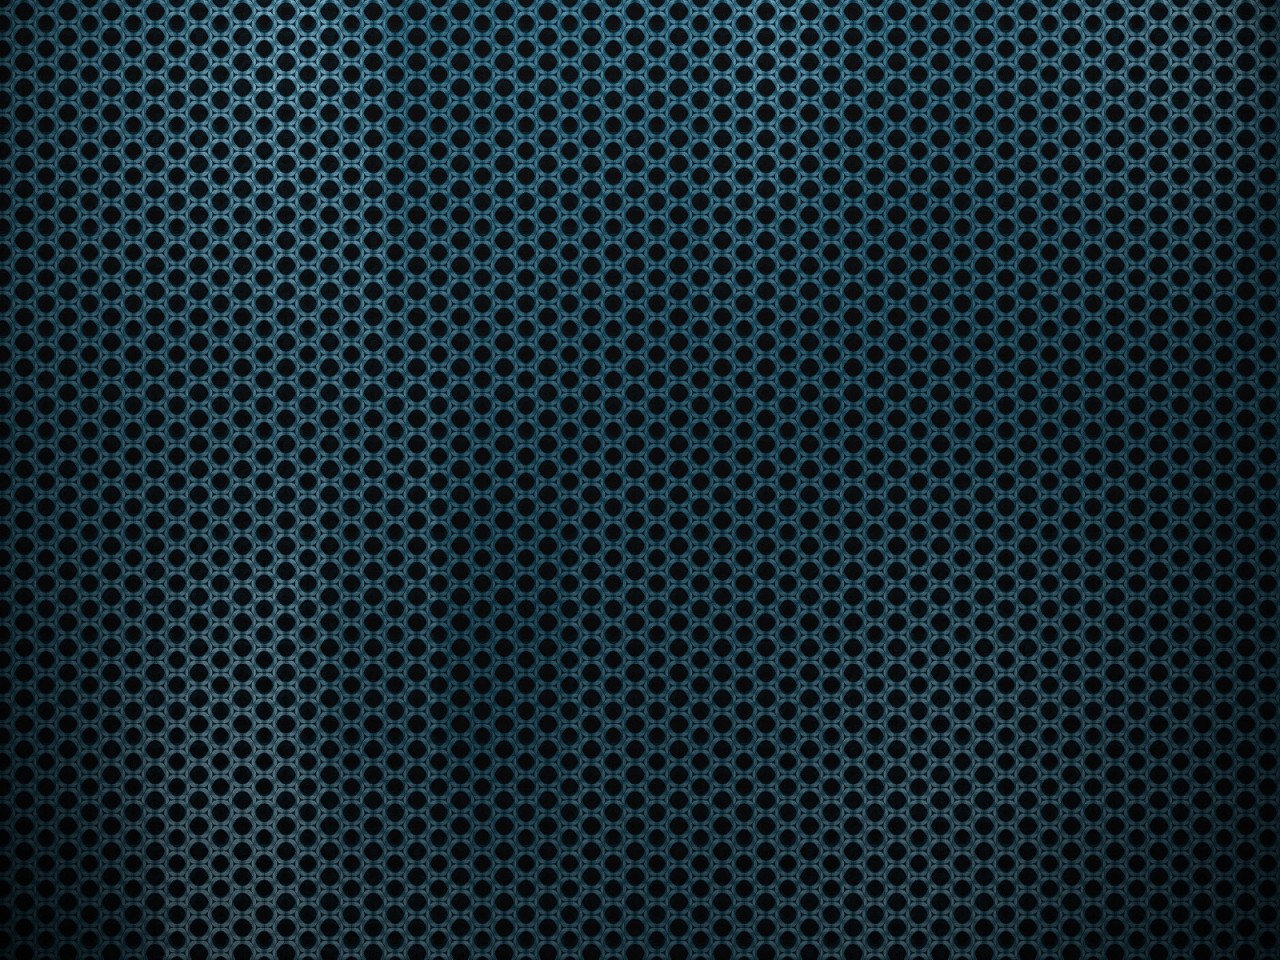 Perforated Blue Metal - High Definition, High Resolution HD Wallpapers : High Definition, High ...